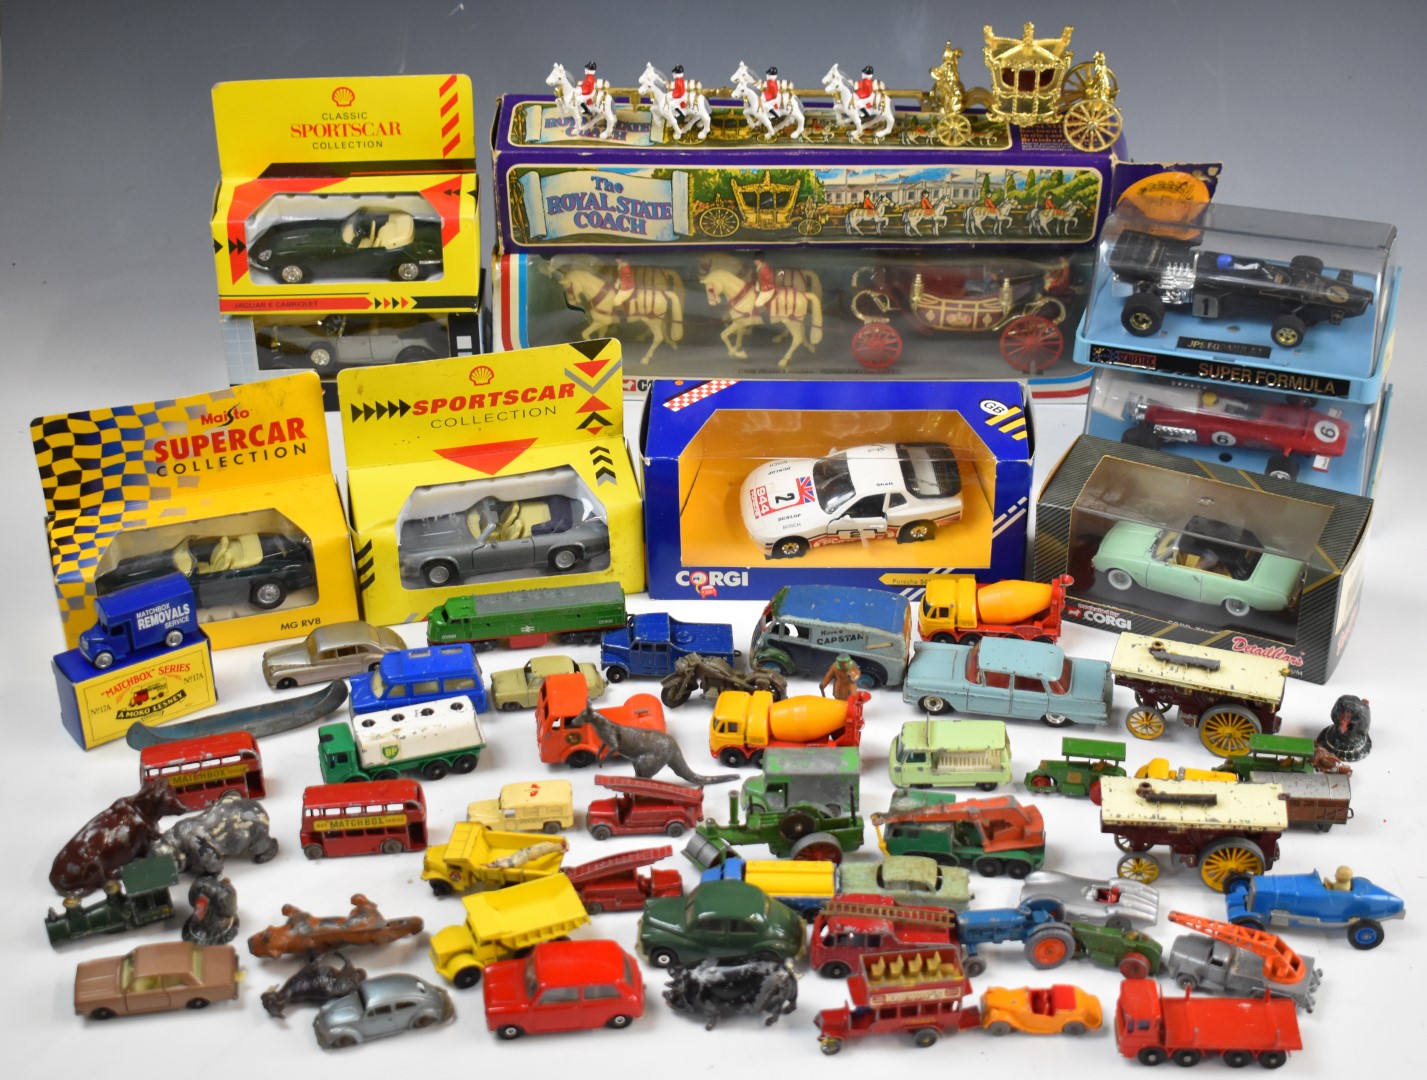 A collection of loose and boxed diecast model cars including Corgi, Dinky, Lesney Matchbox and